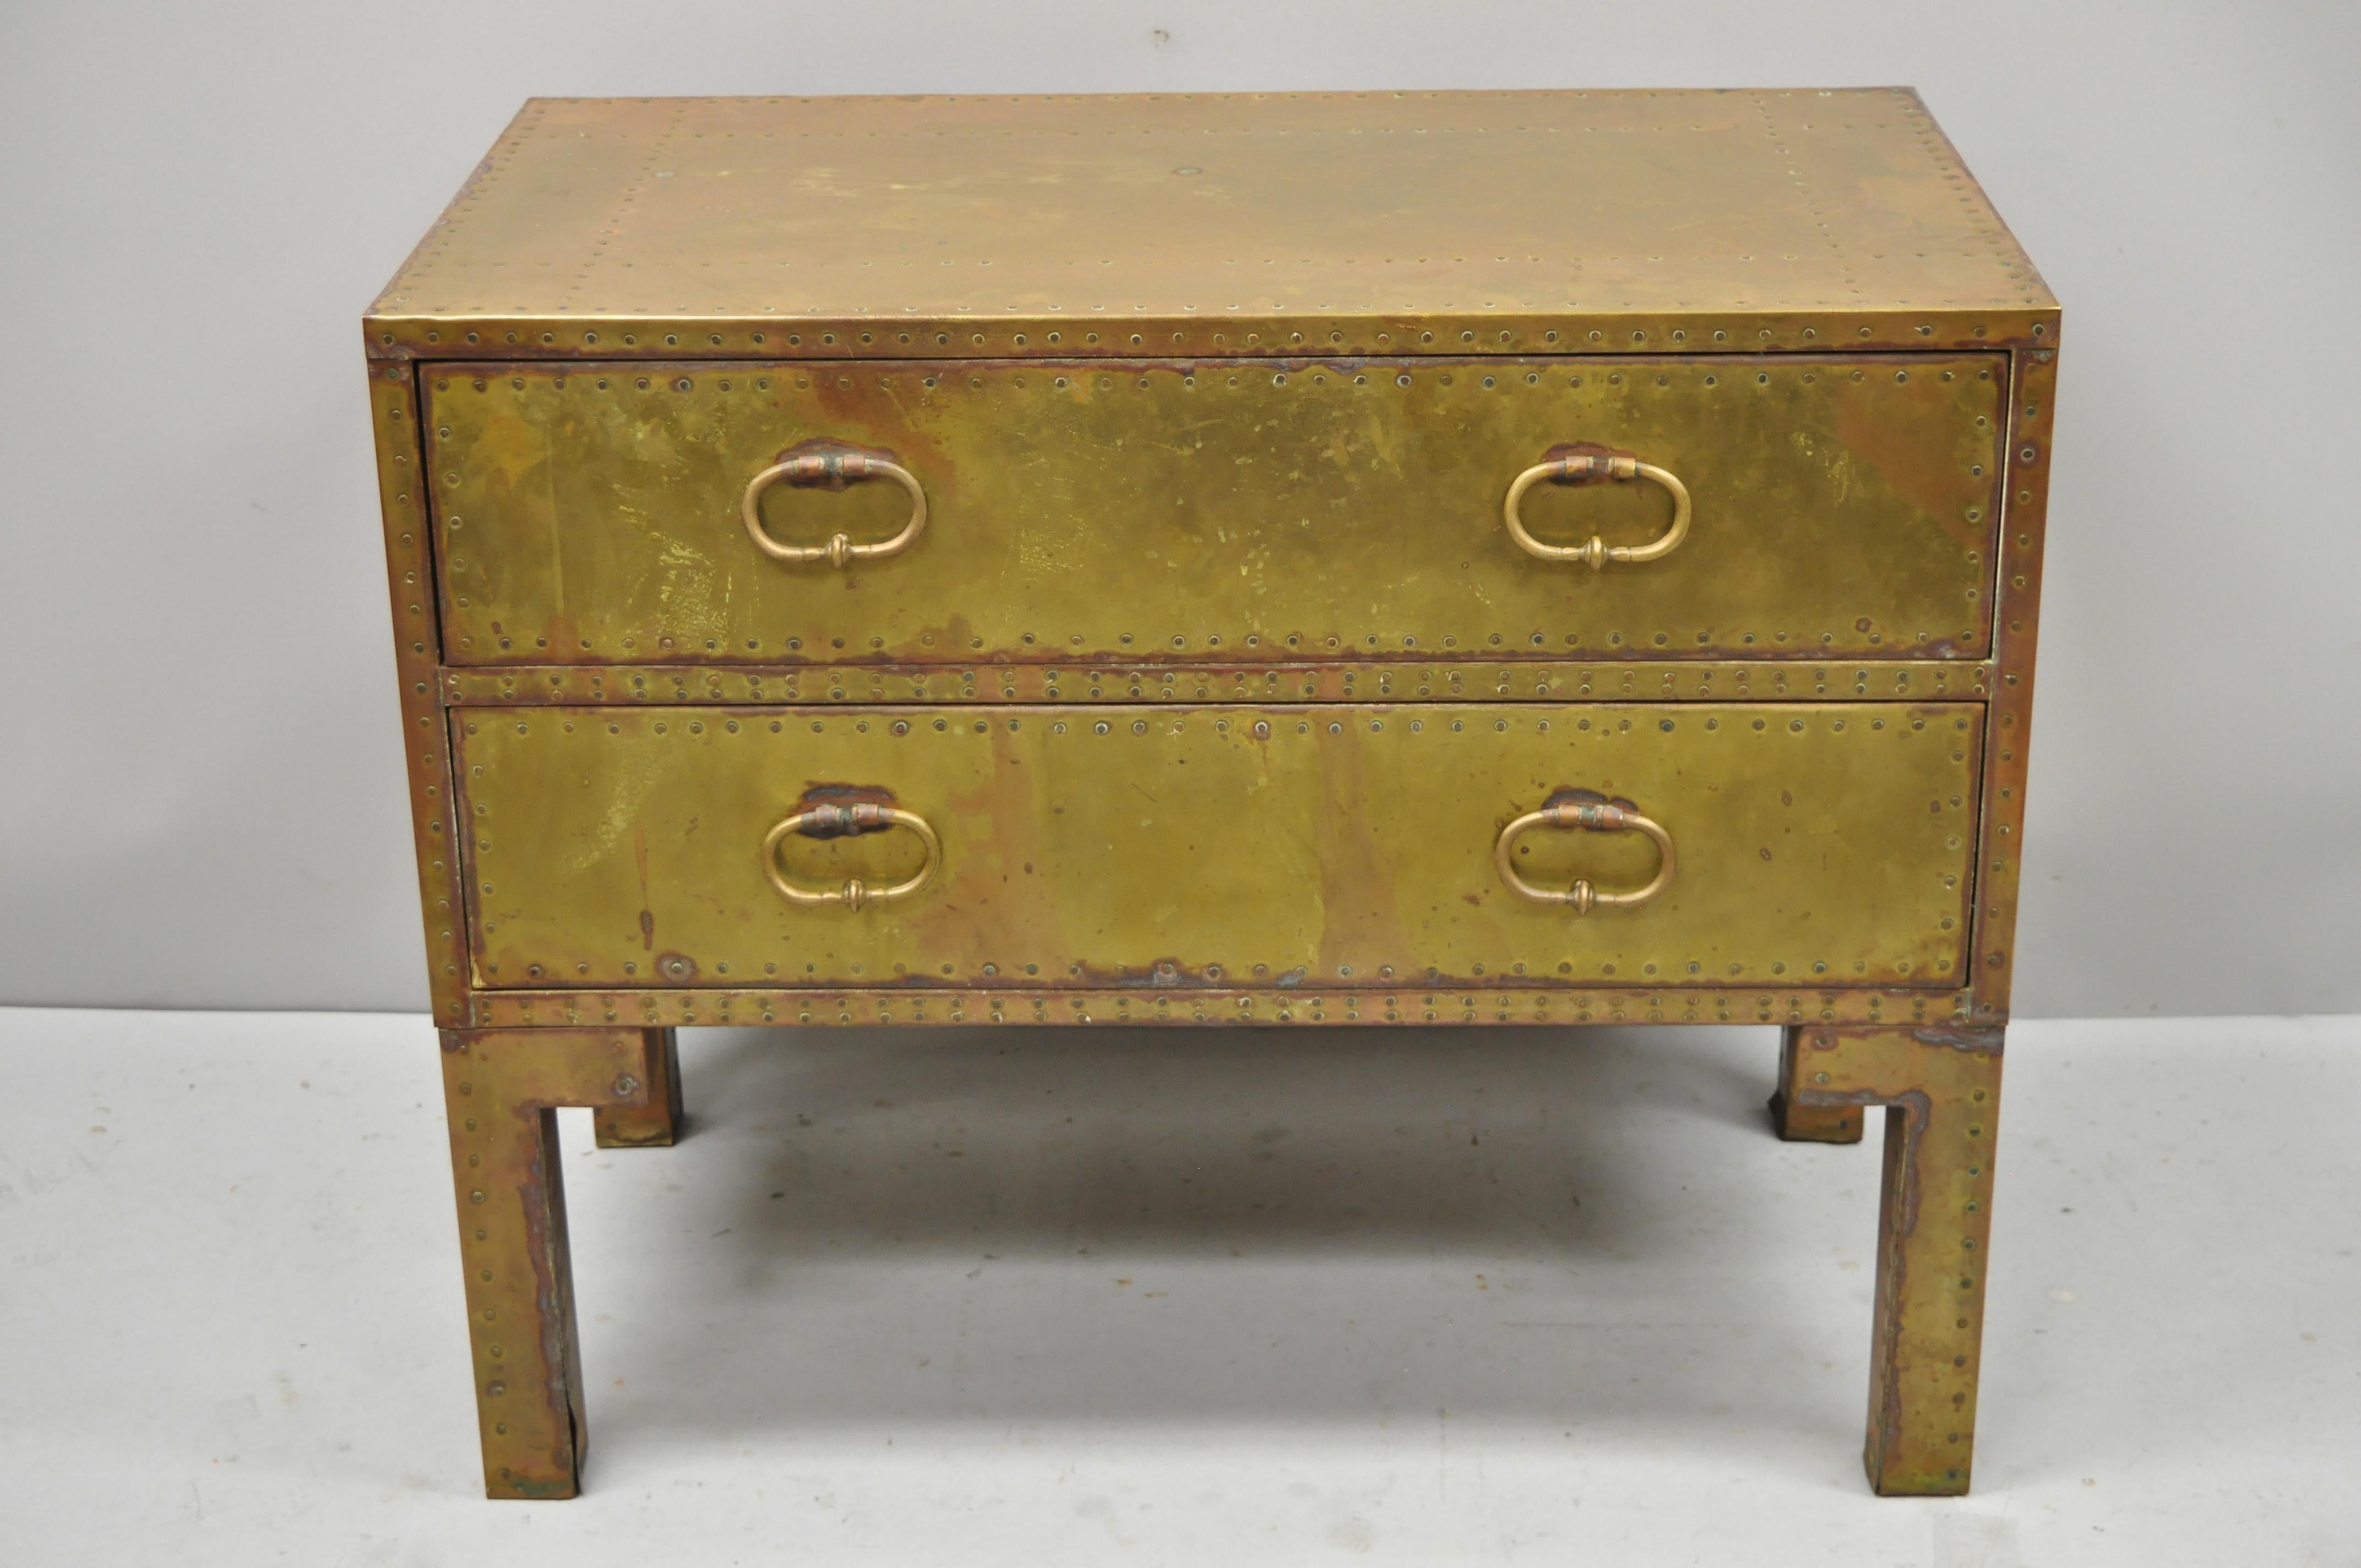 Vintage Sarreid brass studded English Campaign style two-drawer chest. Item features brass wrapped solid wood frame, original label, 2 dovetailed drawers, quality craftsmanship, great style and form, circa mid to late 20th century. Measurements: 28